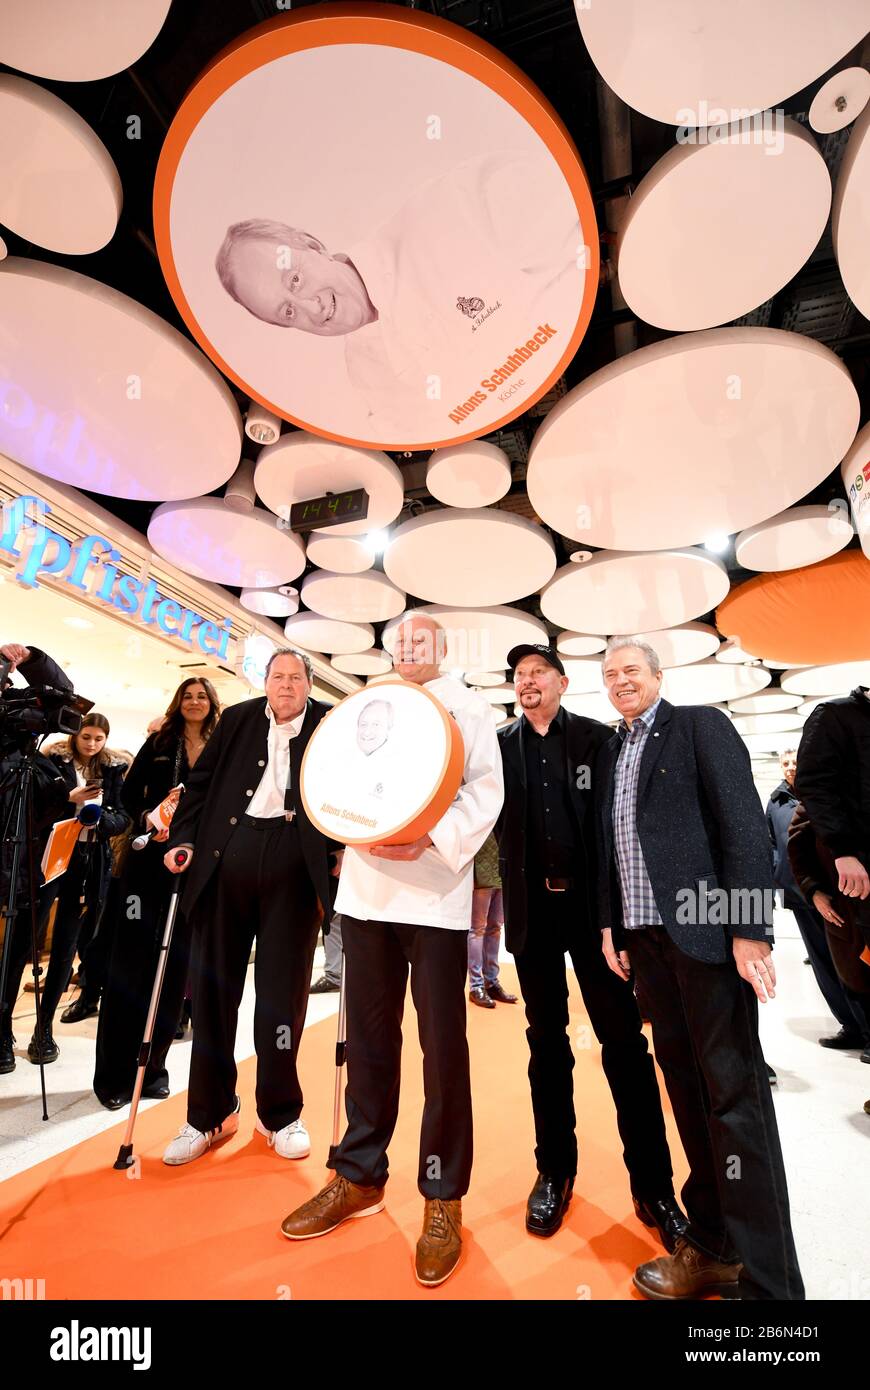 Munich, Germany. 11th Mar, 2020. Karen Webb (l-r), presenter, Ottfried Fischer, actor, Alfons Schuhbeck, star chef, Barny Murphy and Günther Sigl, musician of the band Spider Murphy Gang, stand in the Stachus Passages under a ceiling circle in the Sky of Fame with a photo of Schubeck. In the Sky of Fame, on the ceiling circles of the Stachus Passages, there are pictures of Munich personalities. Fischer, Schubeck, Murphy and Sigl unveiled their pictures on 11.03.2020. Credit: Tobias Hase/dpa/Alamy Live News Stock Photo